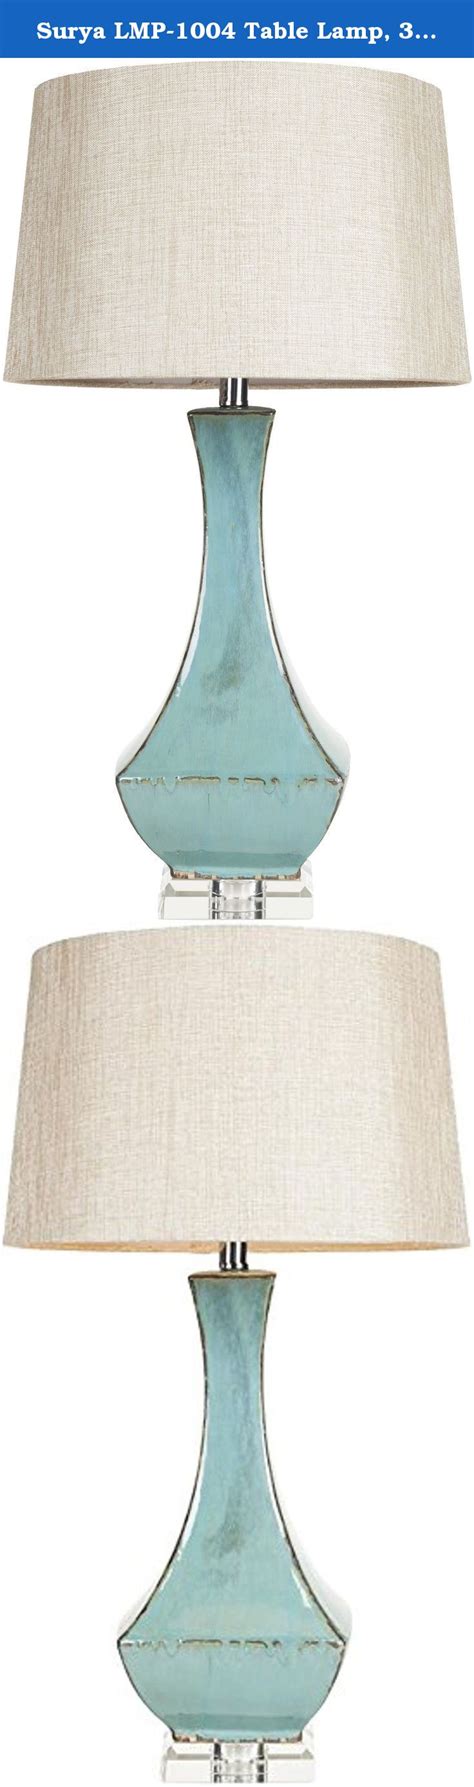 Surya LMP 1004 Table Lamp 30 By 16 By 16 Inch Turquoise Reactive